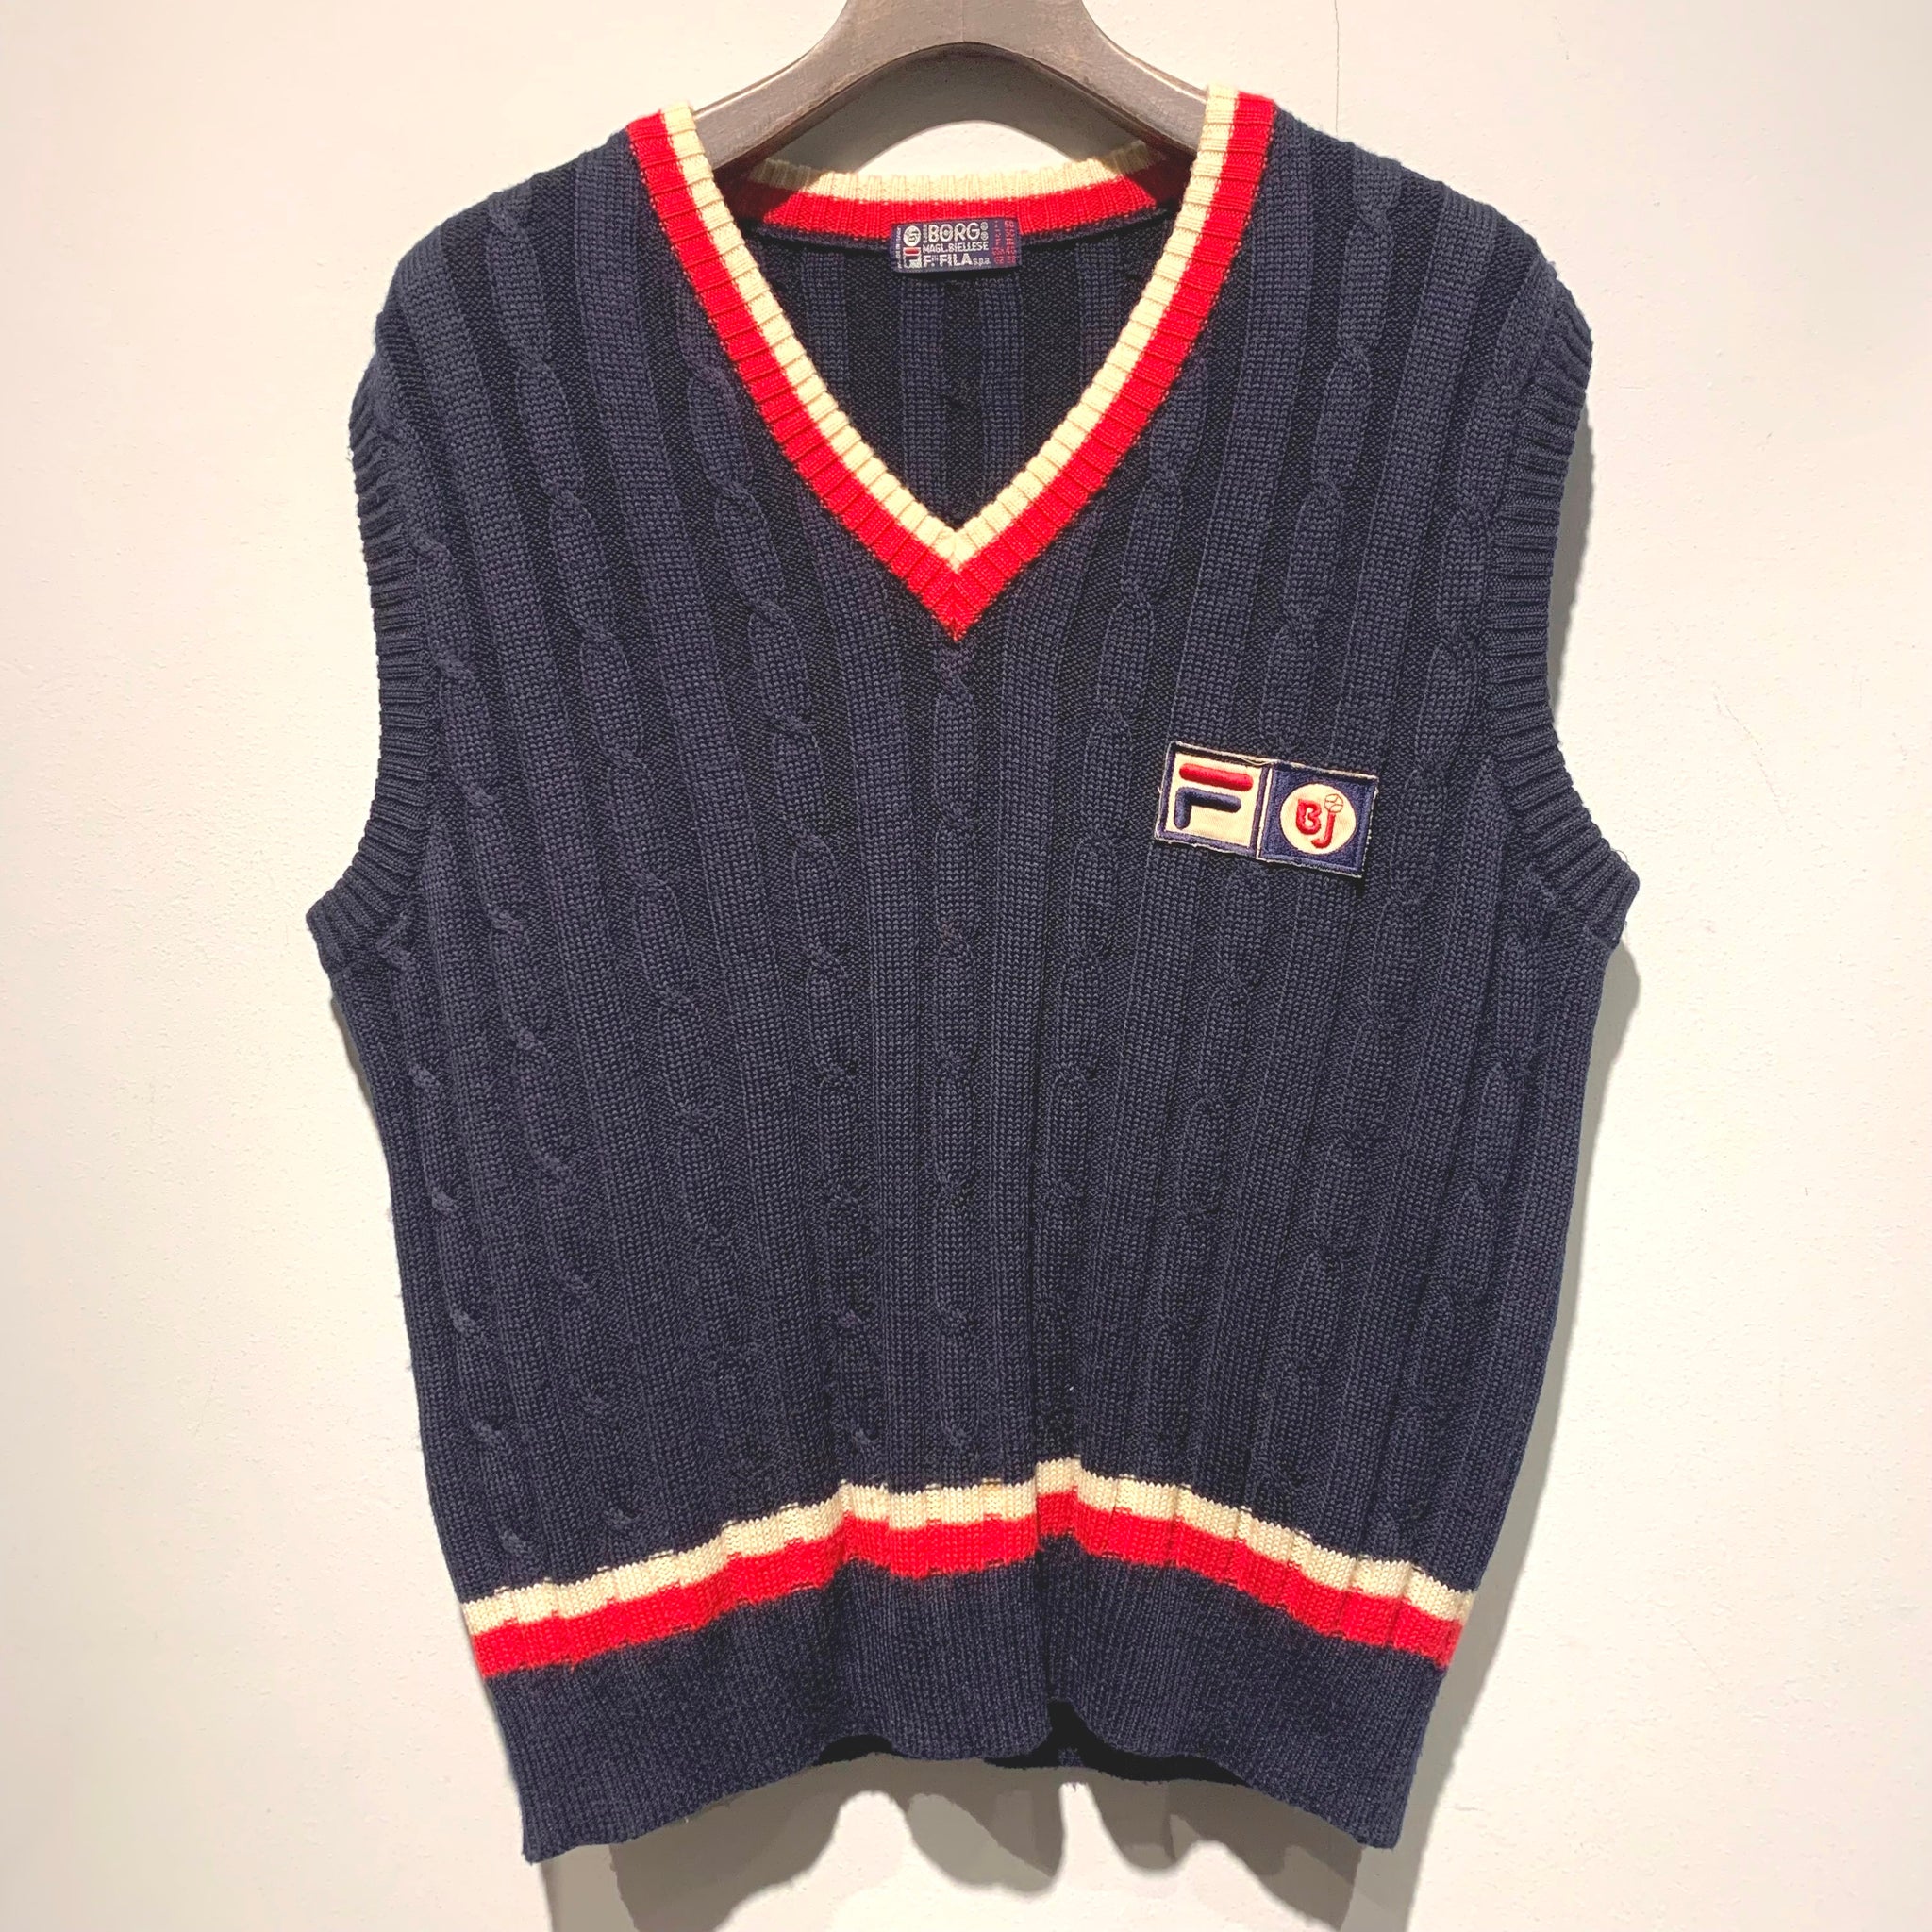 70s FILA BJORN Knit Vest/made in ITARY/ size 50 ReSacca